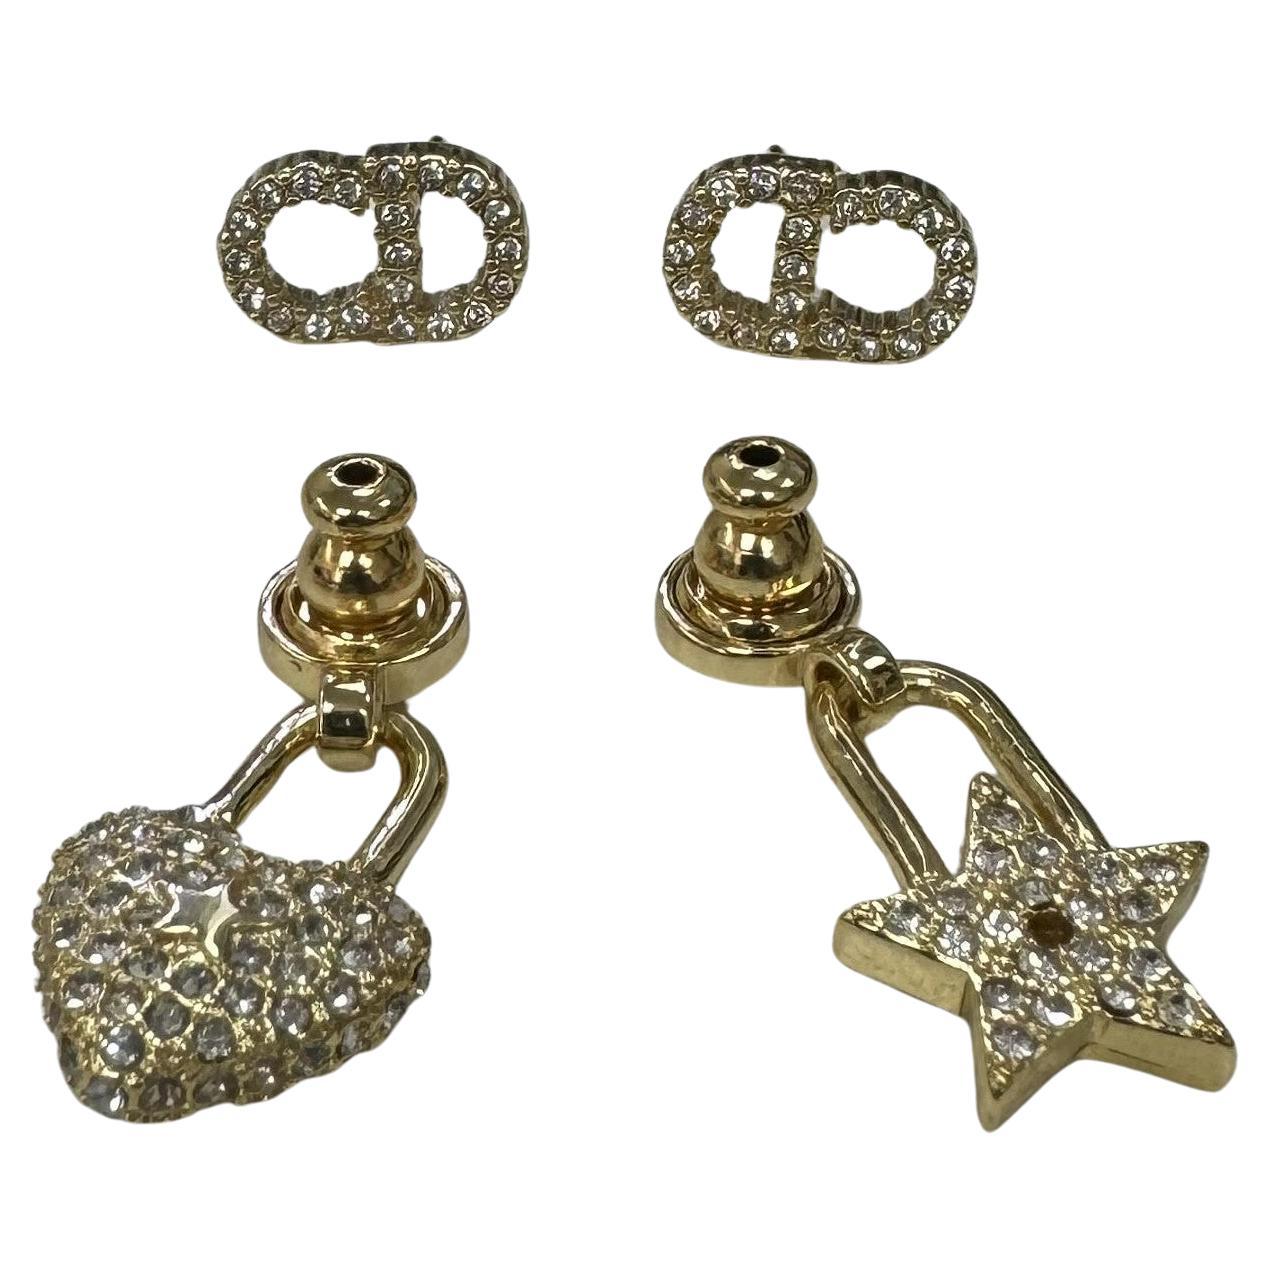 Christian Dior Heart and Star Earrings with Crystals over "CD"in Crystals For Sale